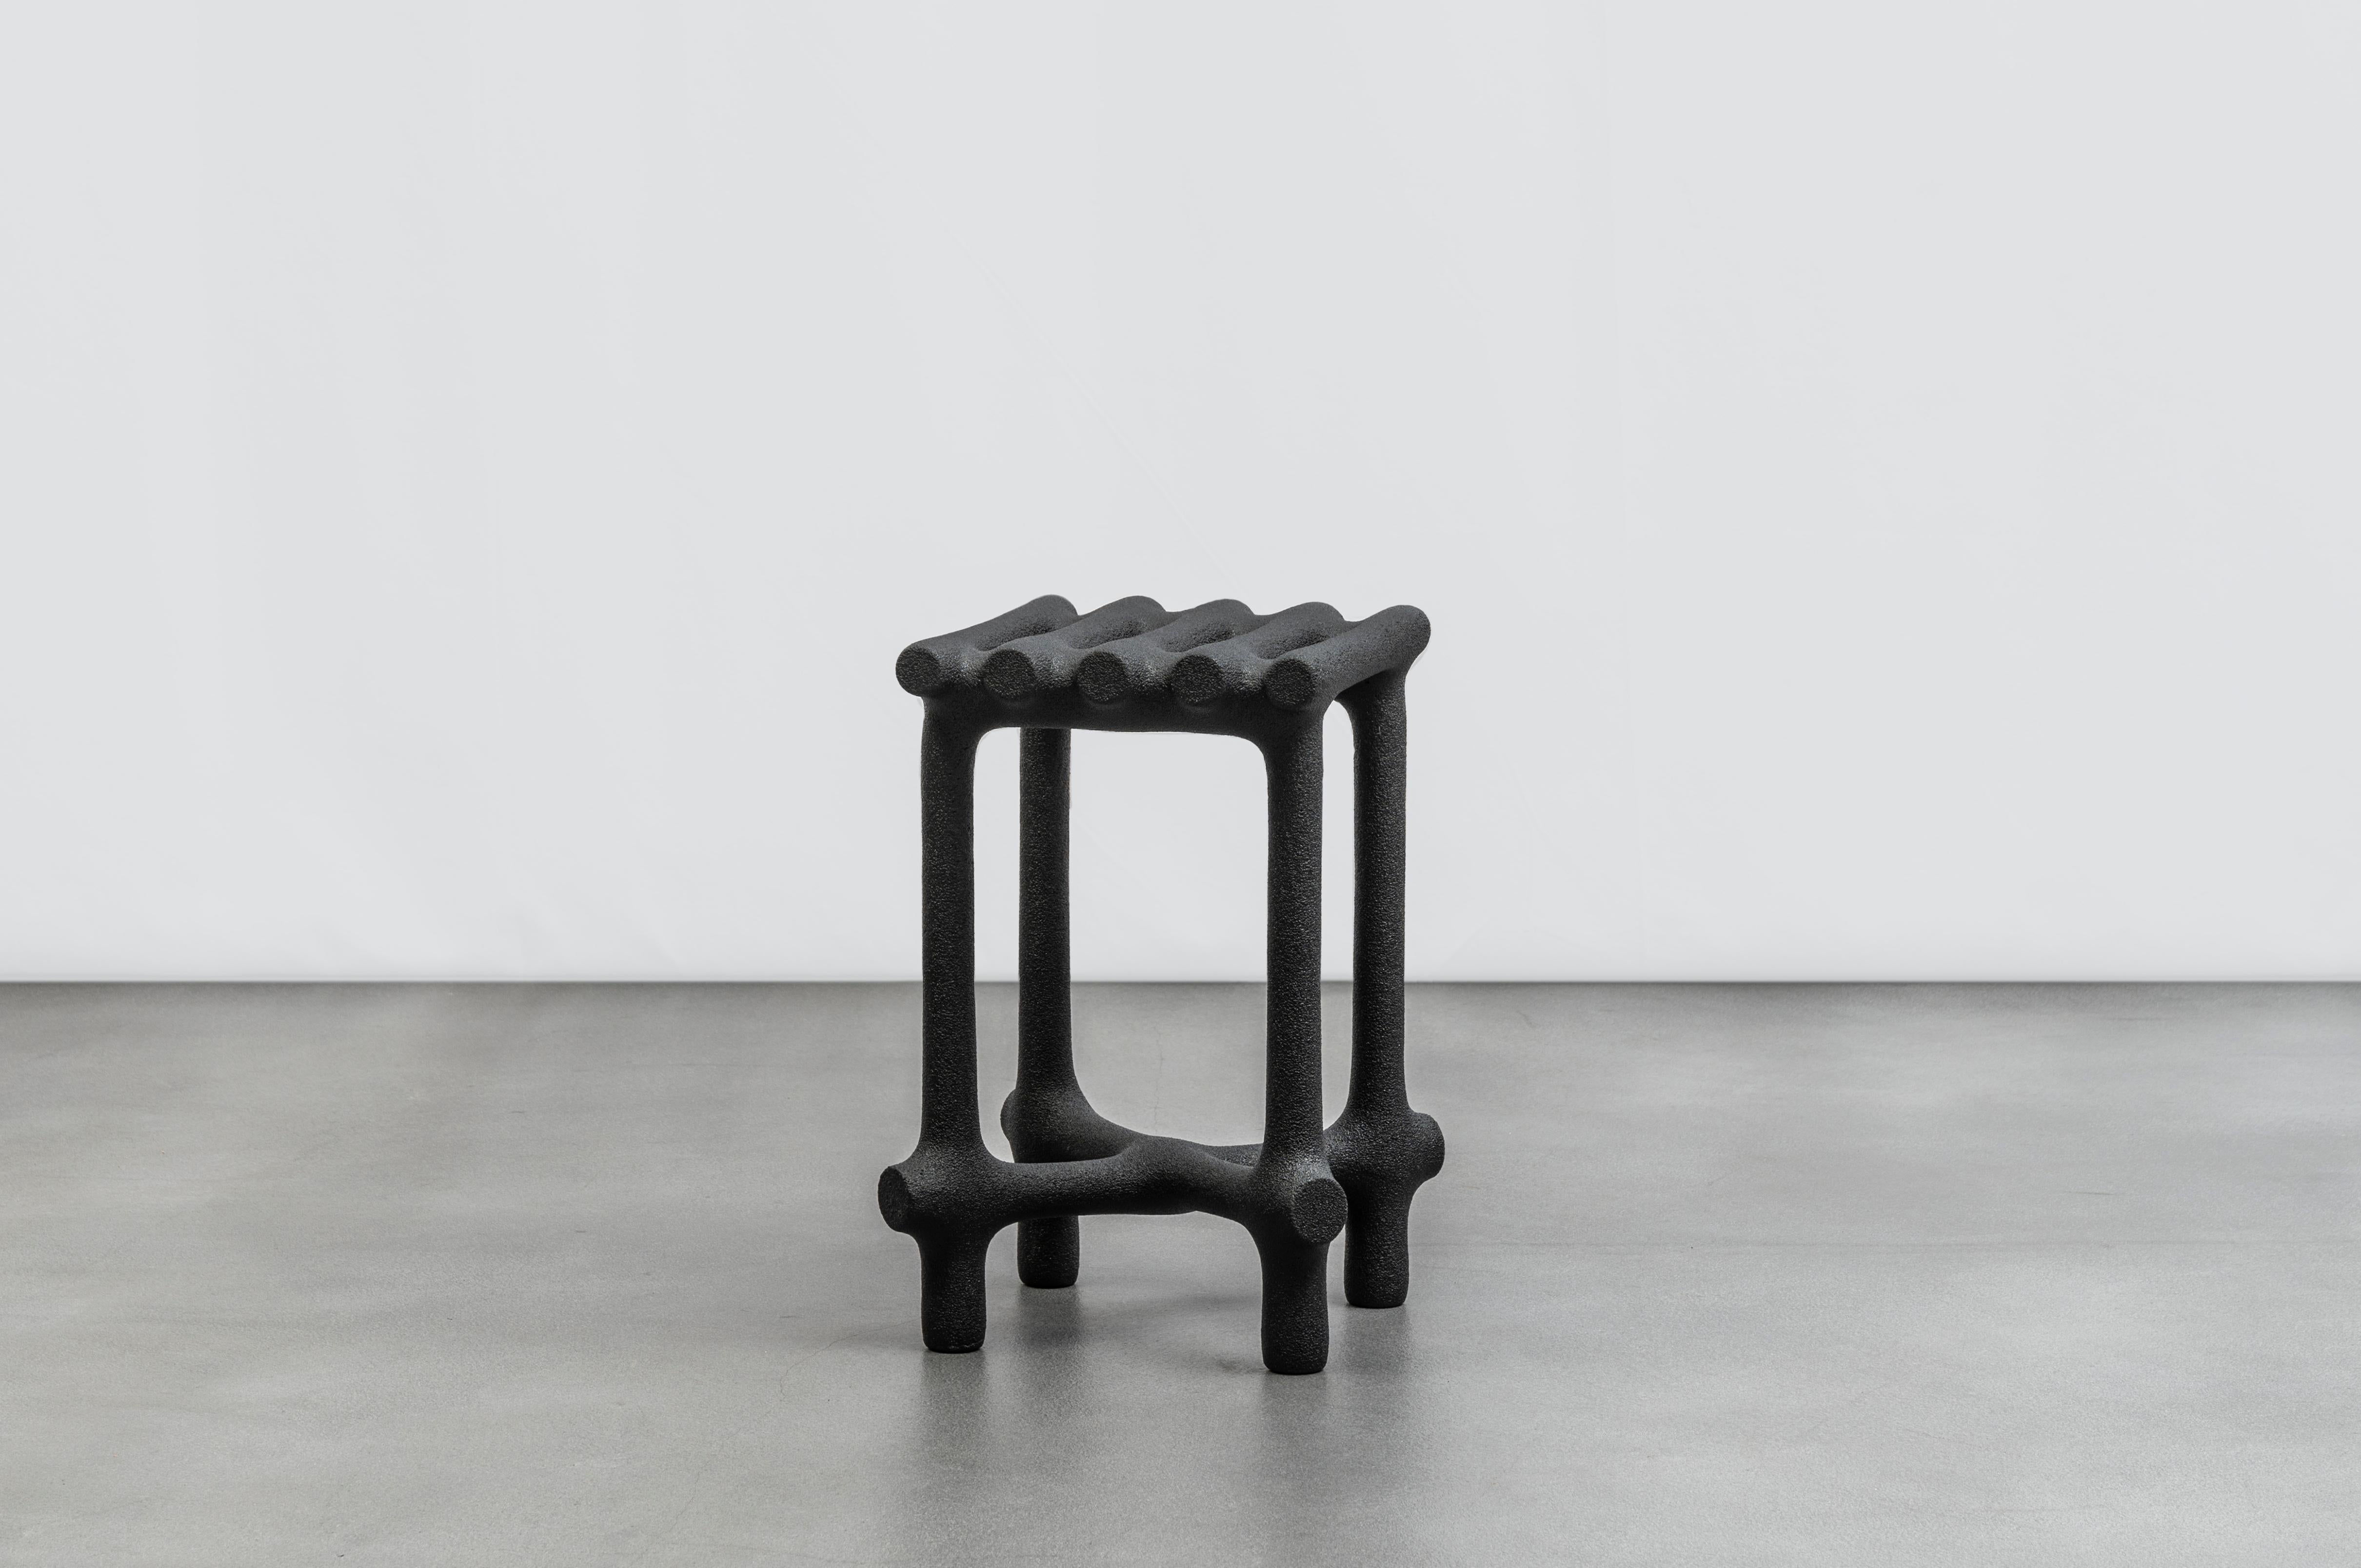 Basic stool by HWE
Limited Edition
Materials: Waste SLS 3D nylon powder, Sand from sustainable sources
Dimensions: H 48 x W 31 x D 31 cm 
Colours: black, white, cream, terracotta, mint

Hot Wire Extensions is a young sustainable design brand,